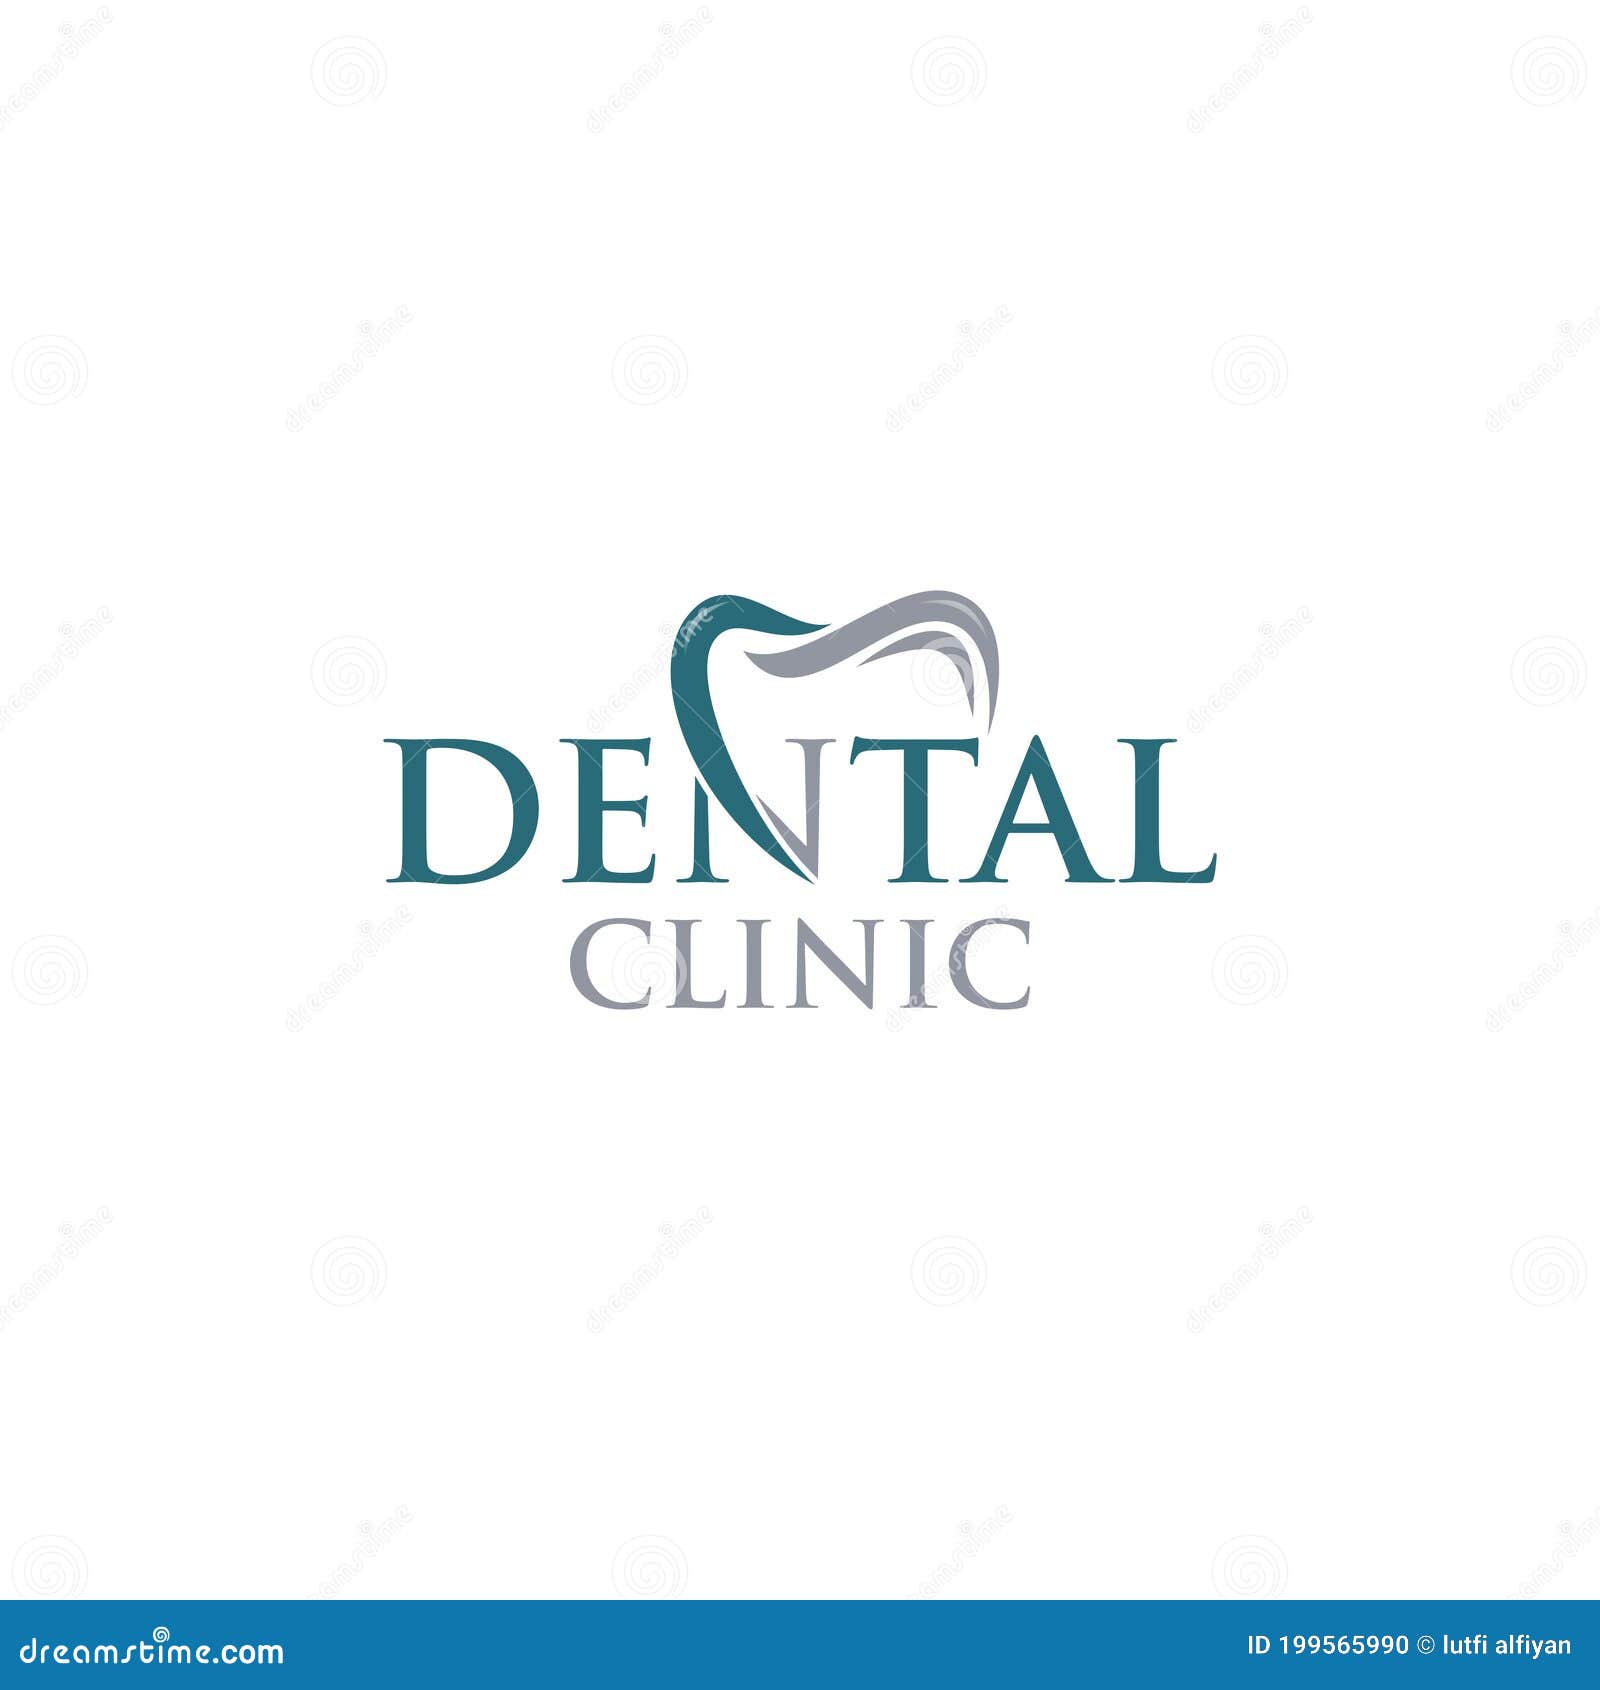 Abstract Dental Clinic Logo Design Template Stock Photo - Image of stylish,  design: 199565990